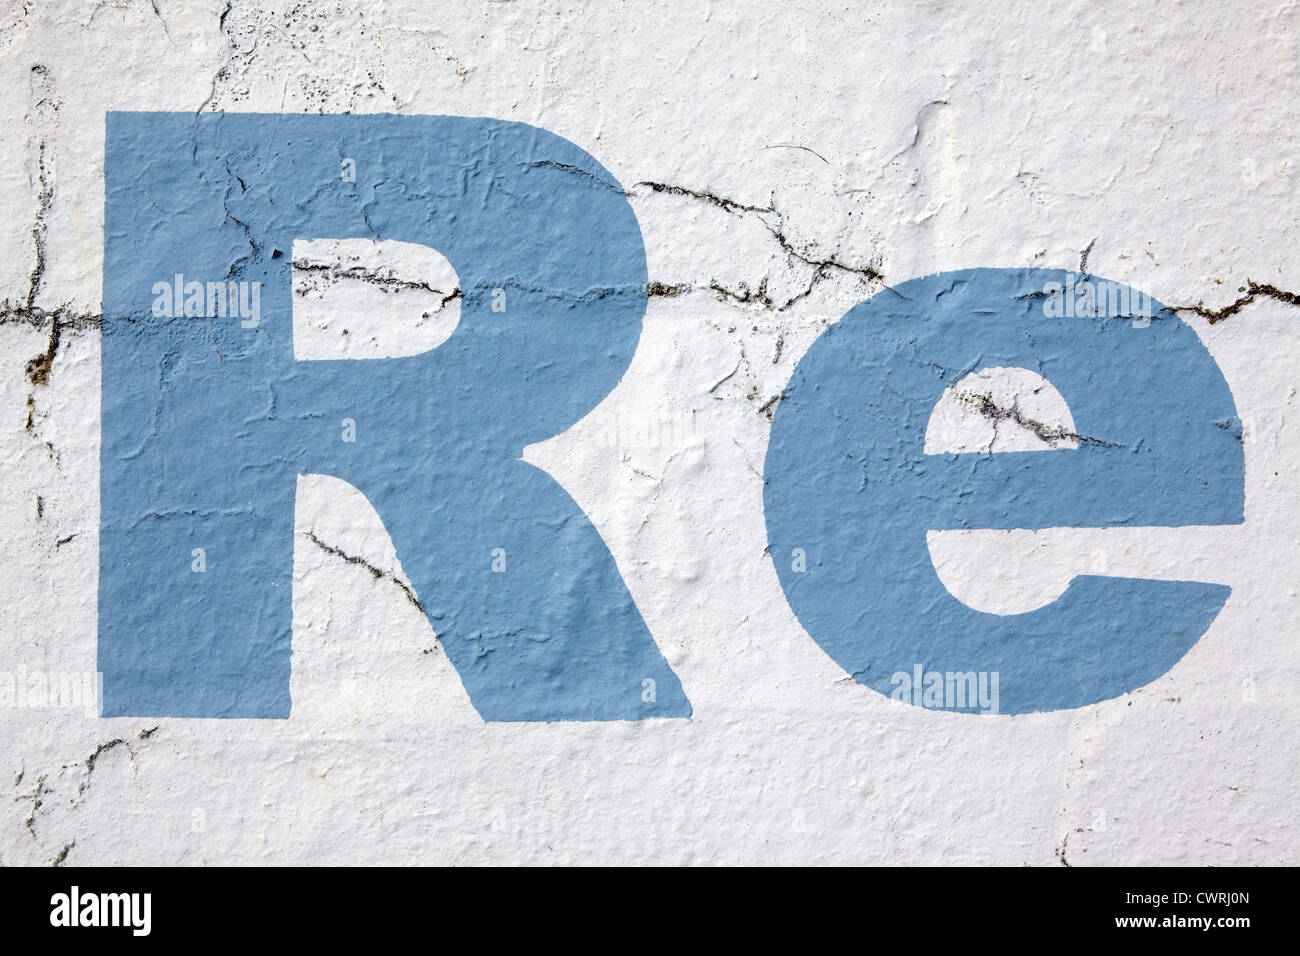 Lettering 'Re', stencil style sky blue paint on a white washed wall background, crumbling and distressed look, Cornwall, UK Stock Photo